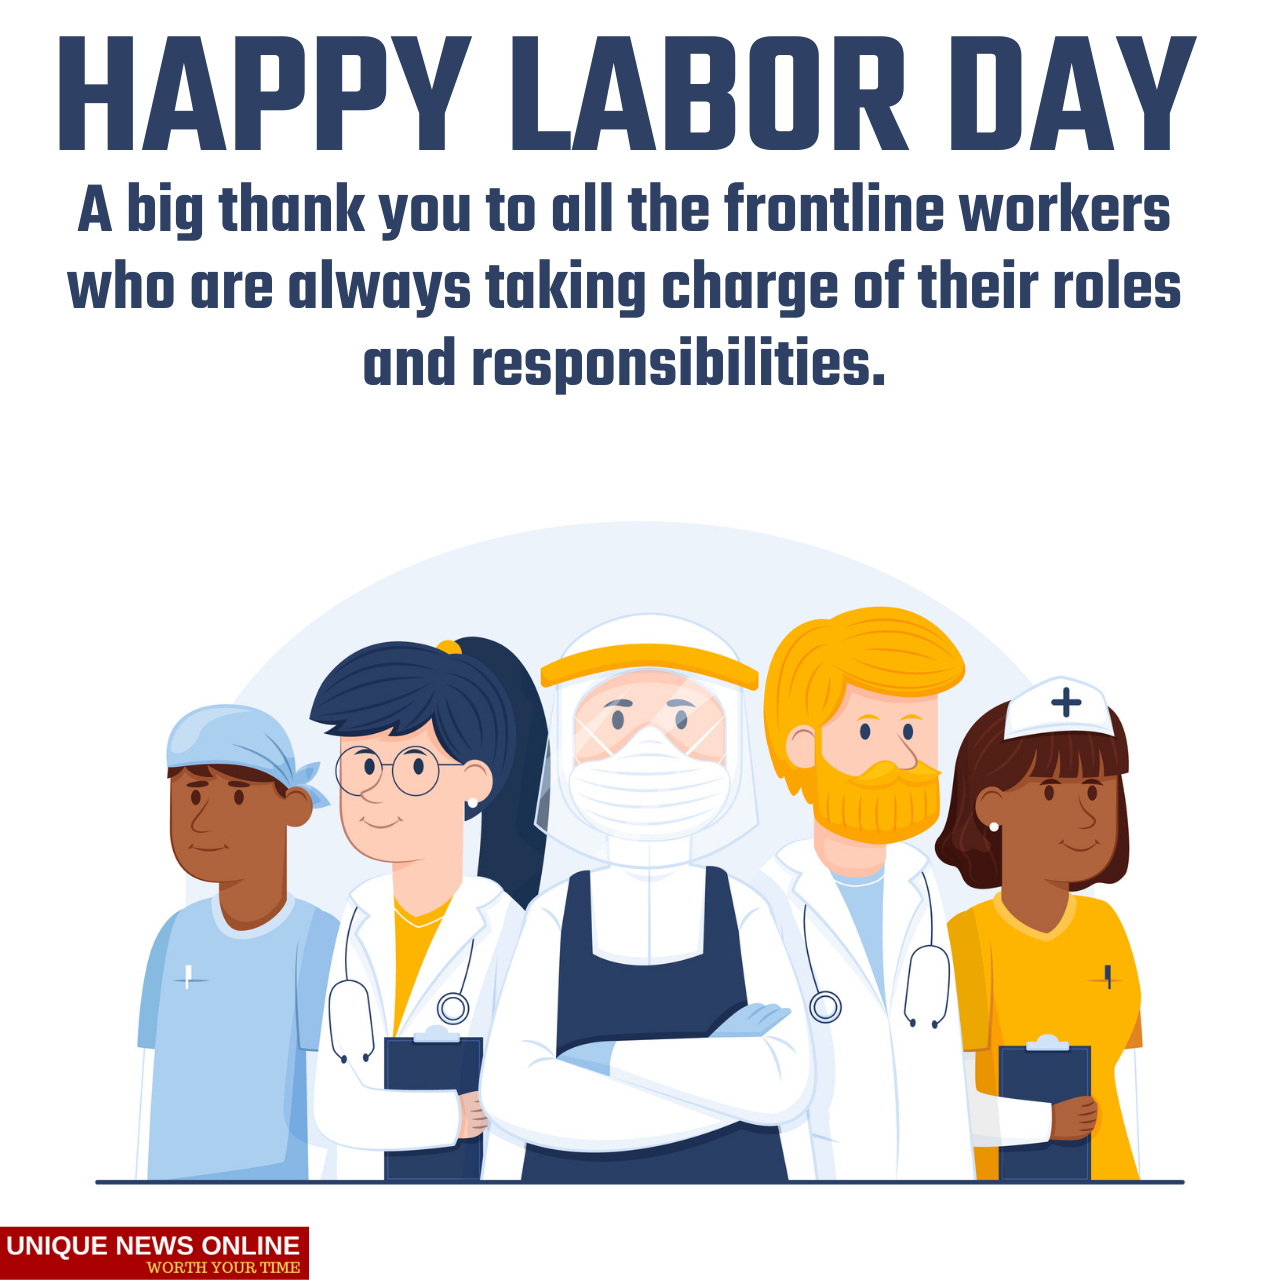 Happy Labor Day 2021 Quotes, Images, Wishes, Greetings, Instagram Captions, and Stickers for Frontliners